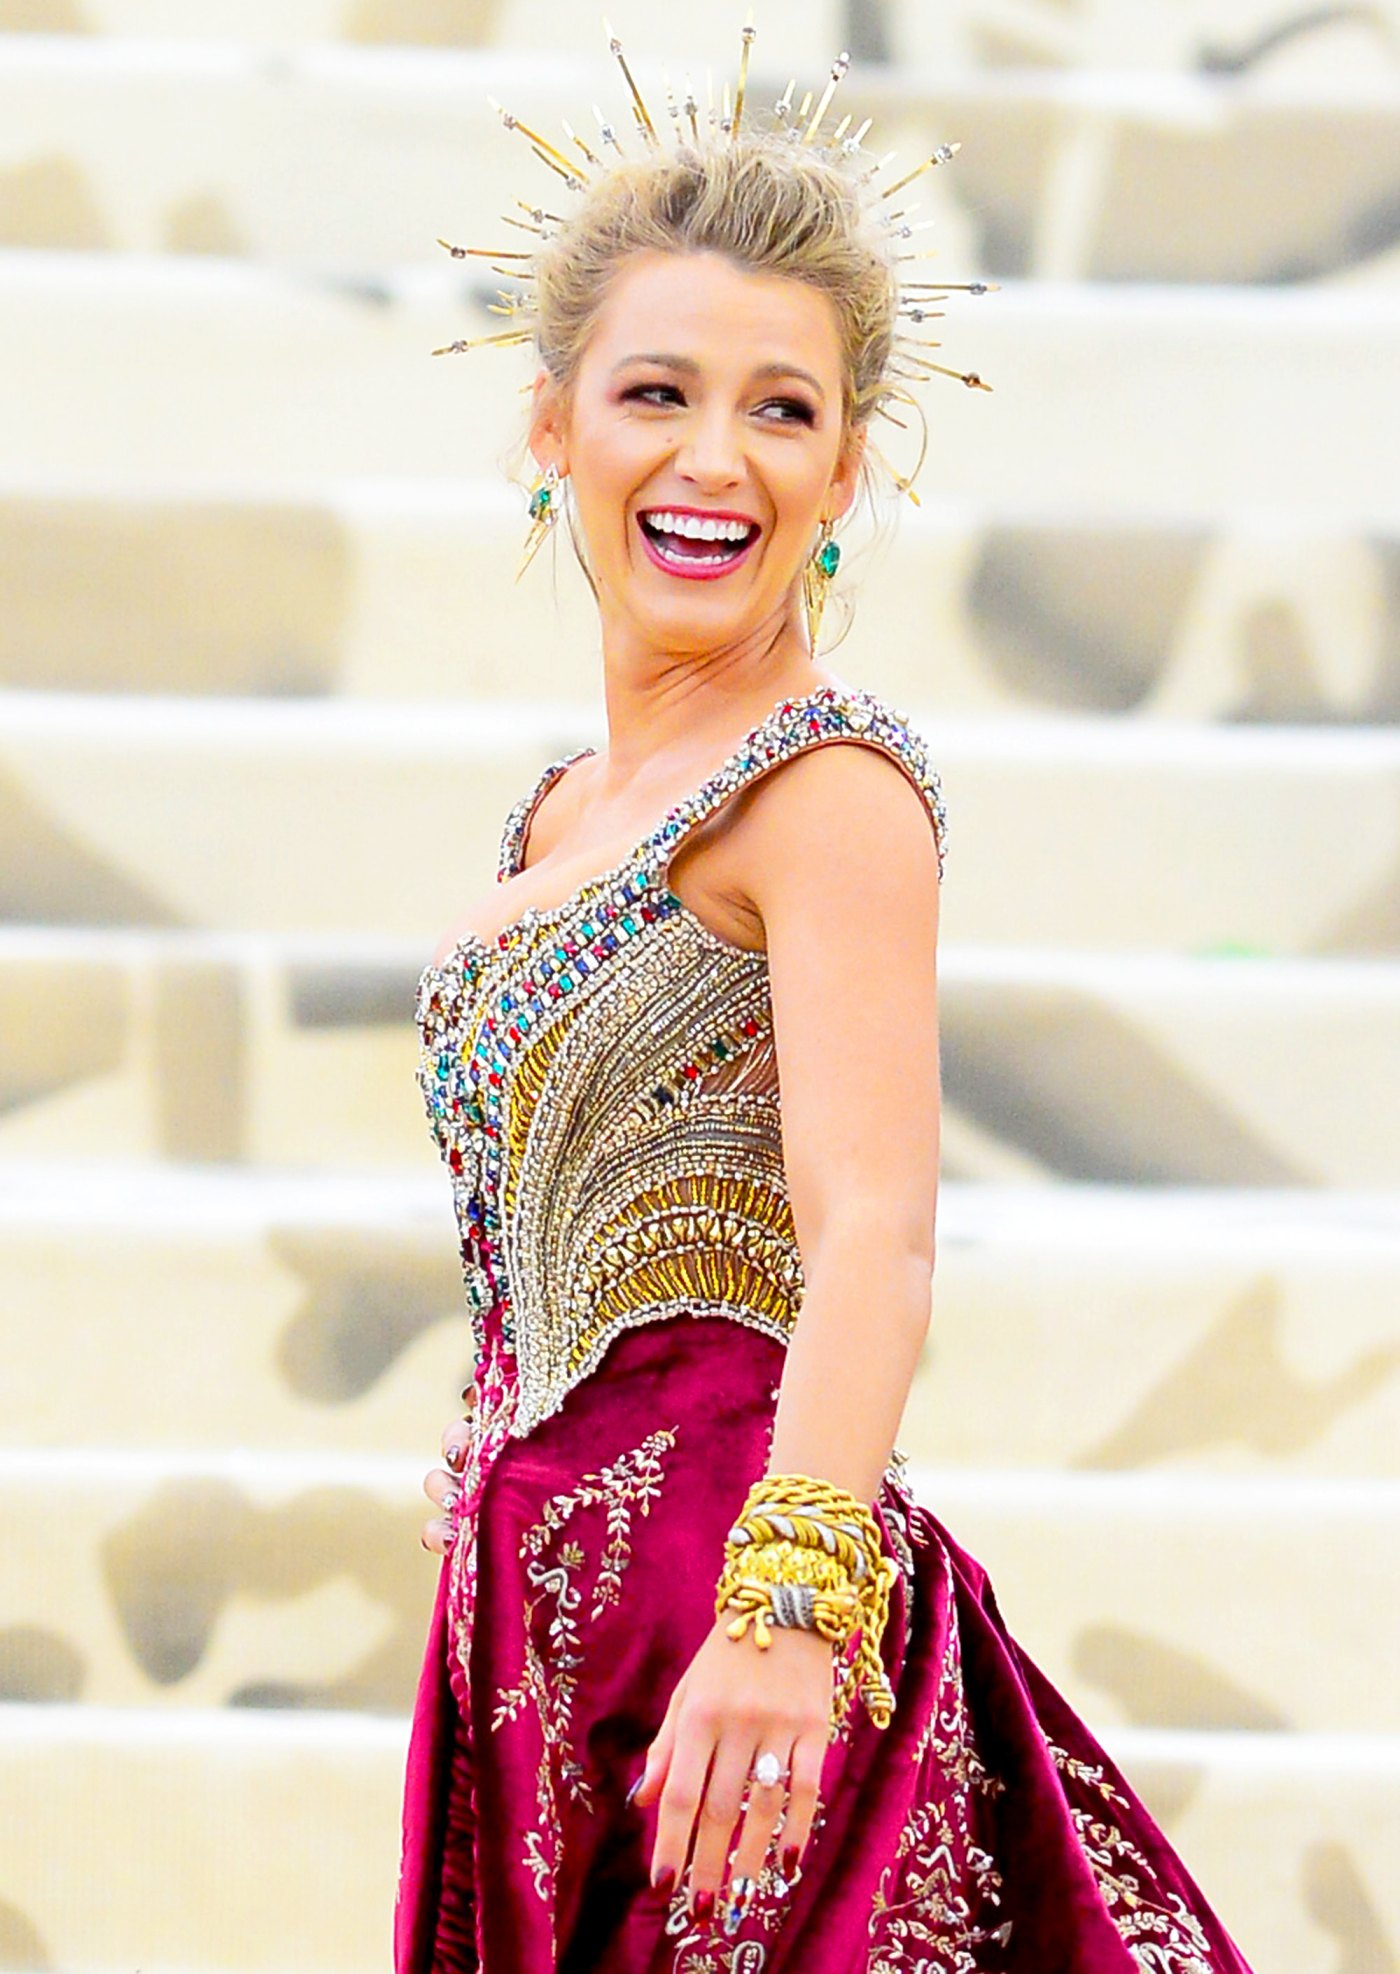 Blake Lively’s Met Gala 2018 Clutch Had a Hidden Message Us Weekly